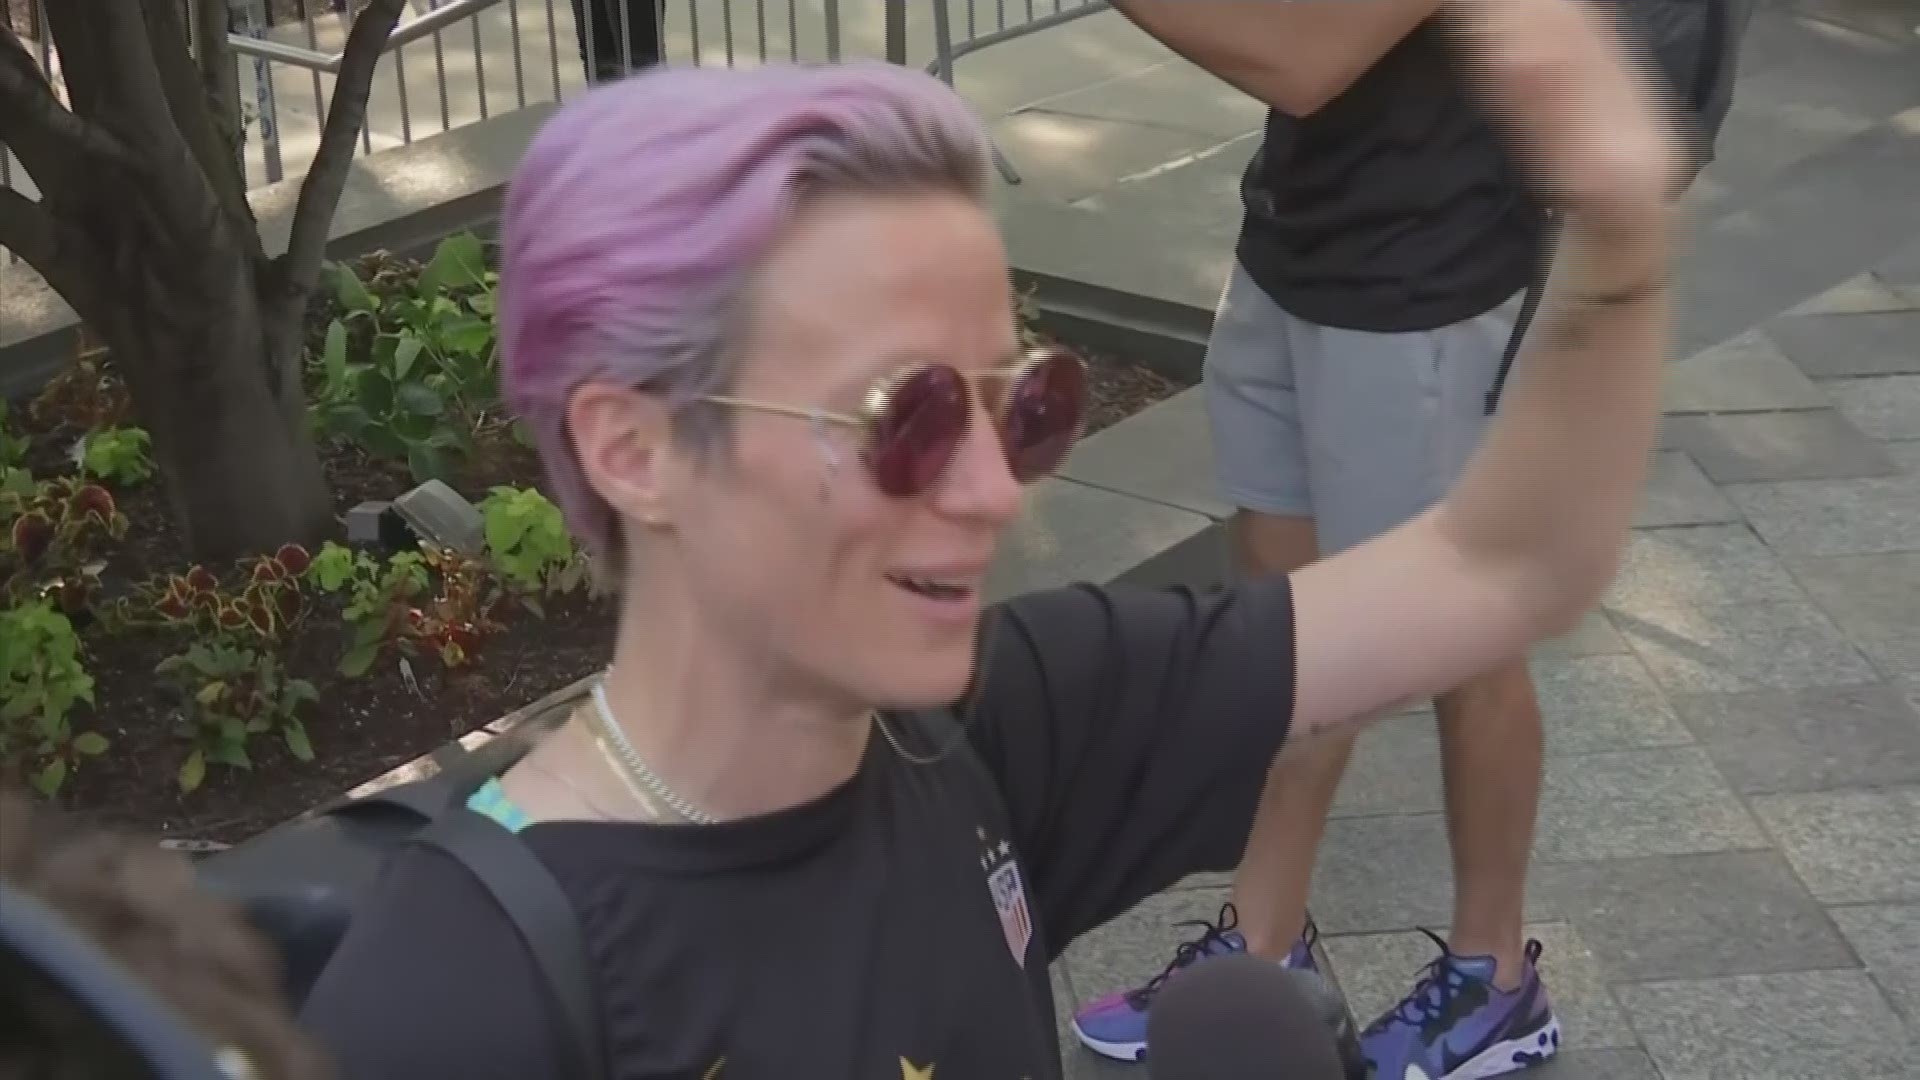 US Soccer star Megan Rapinoe spoke to reporters as the team arrived back in America after winning the Women's World Cup. (AP)